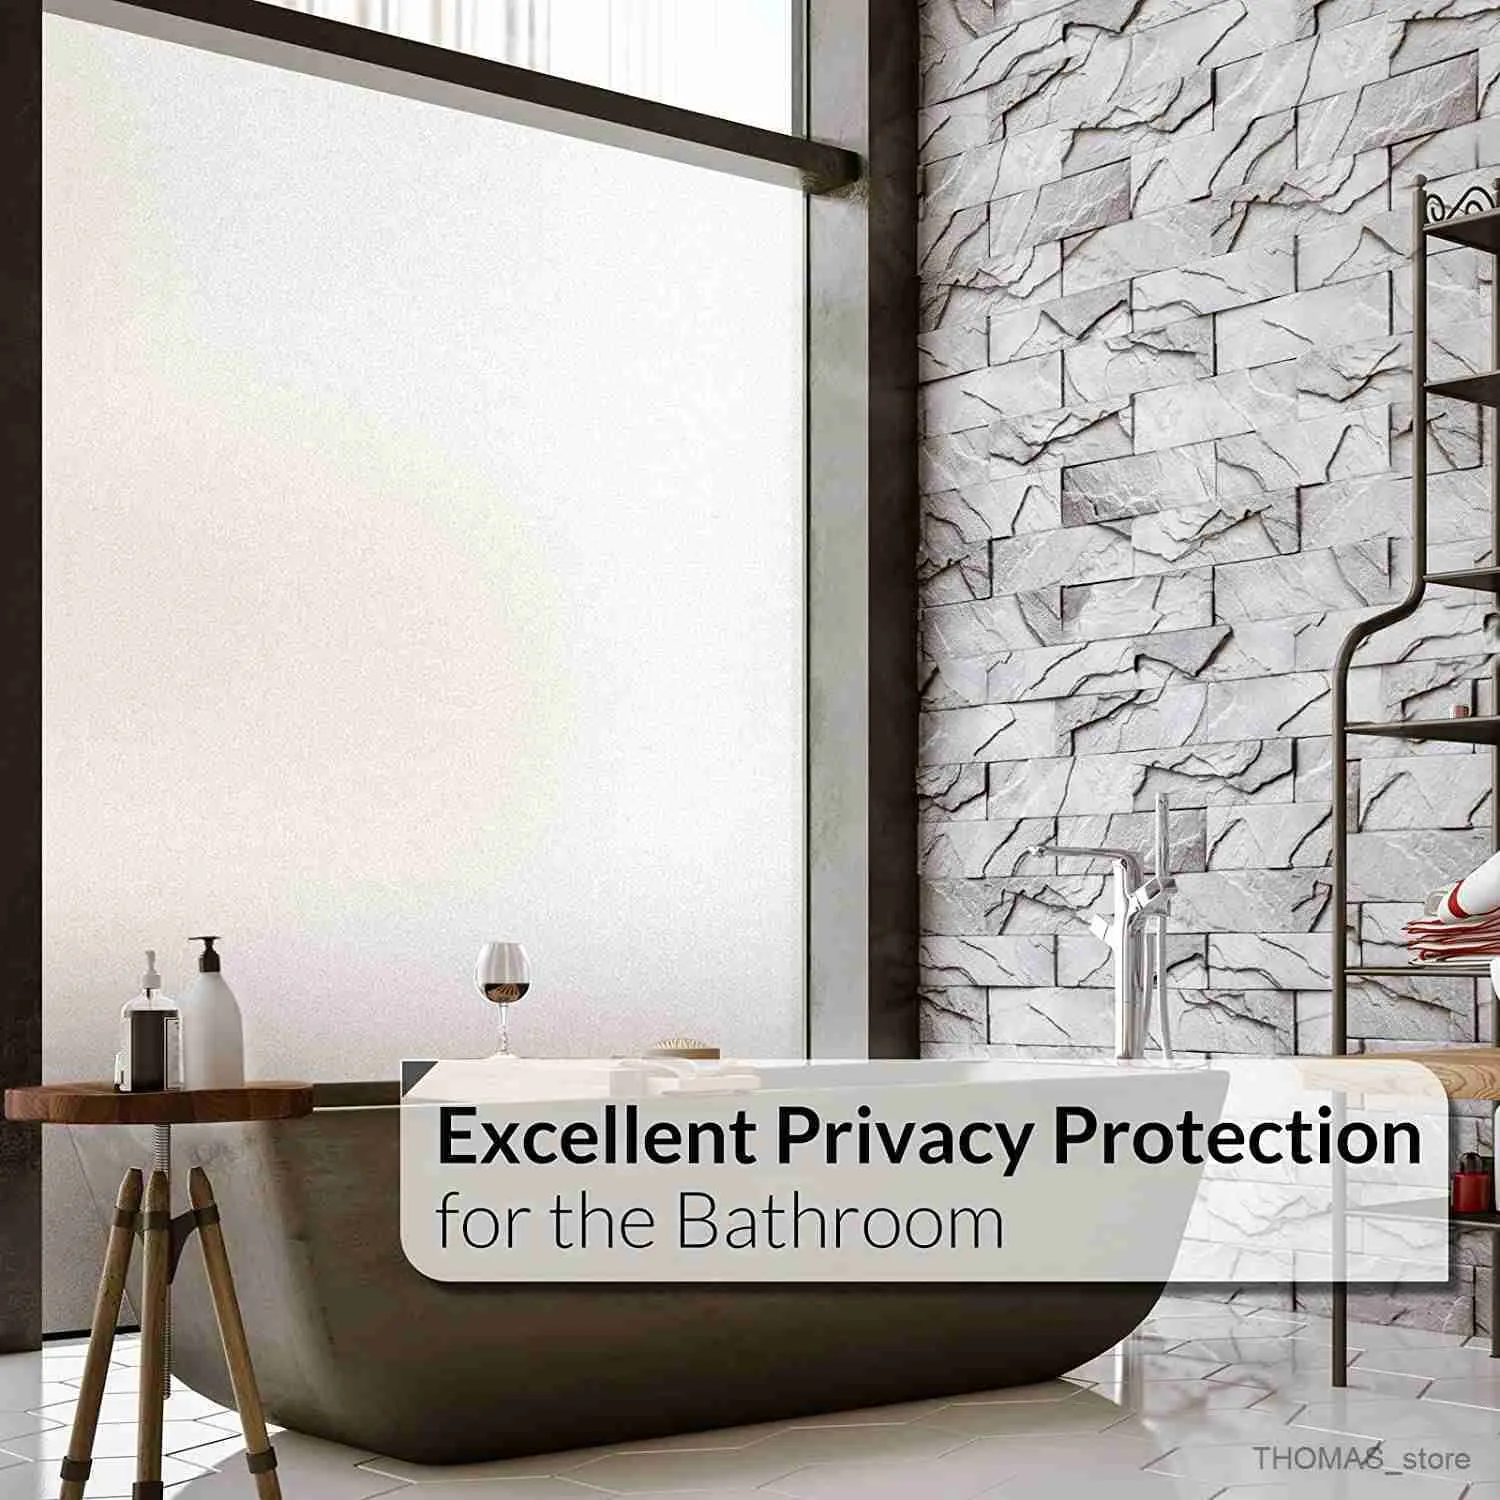 Self Adhesive Frosted Glass Privacy Sticker For Window For Privacy And Heat  Protection Ideal For Bathroom, Home, And Office R230810 From Thomas_store,  $11.41